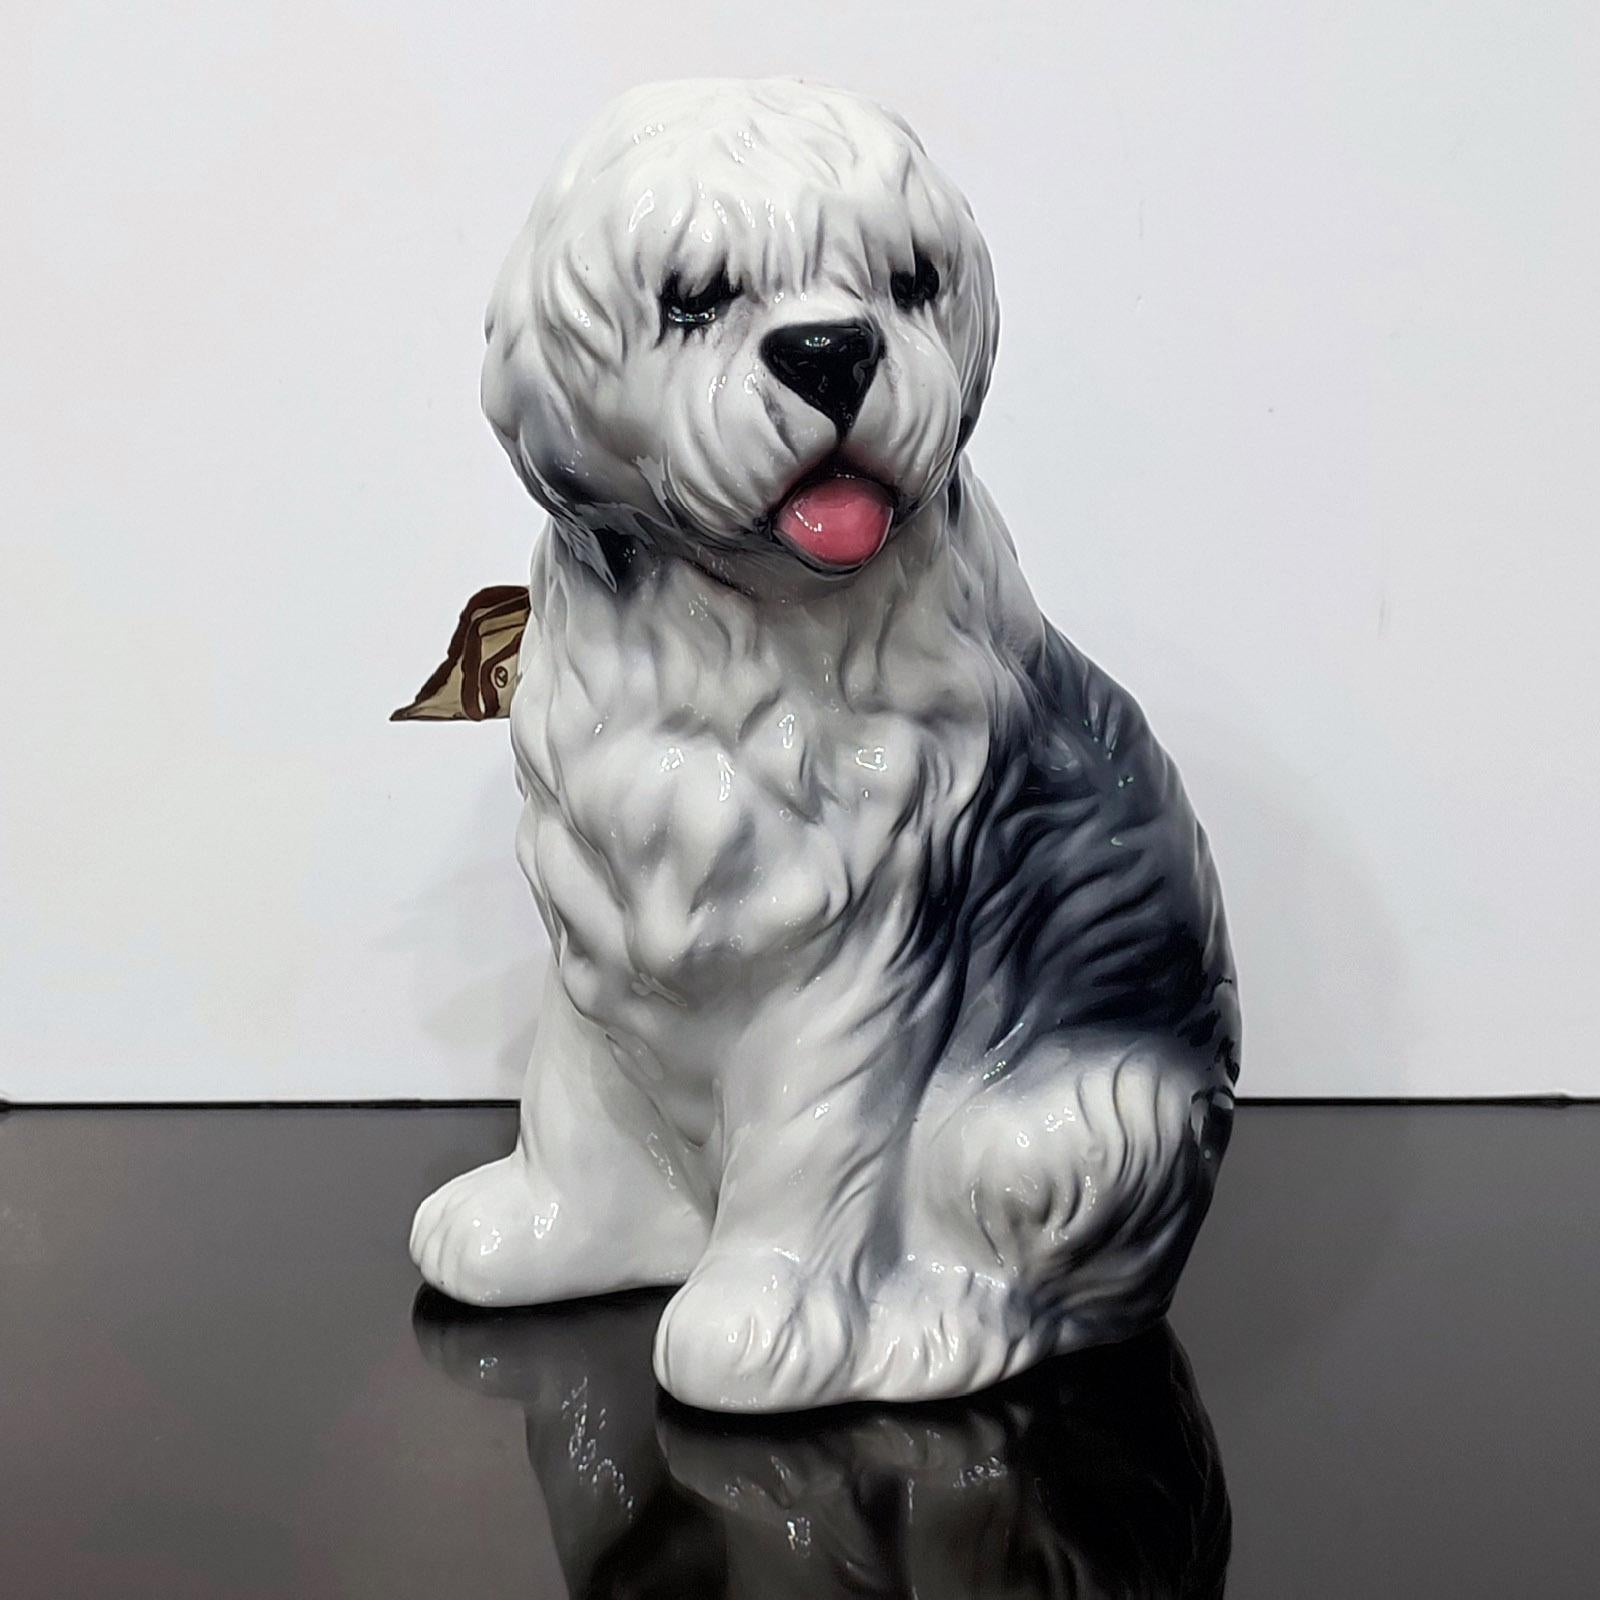 Beautiful, old English sheepdog hand-painted porcelain figurine made by Capodimonte, Italy.
Handmade and hand painted.
Original manufacturer label/certificate.
Measure: 30 cm (18,9 in) high.
Very good condition, as new.